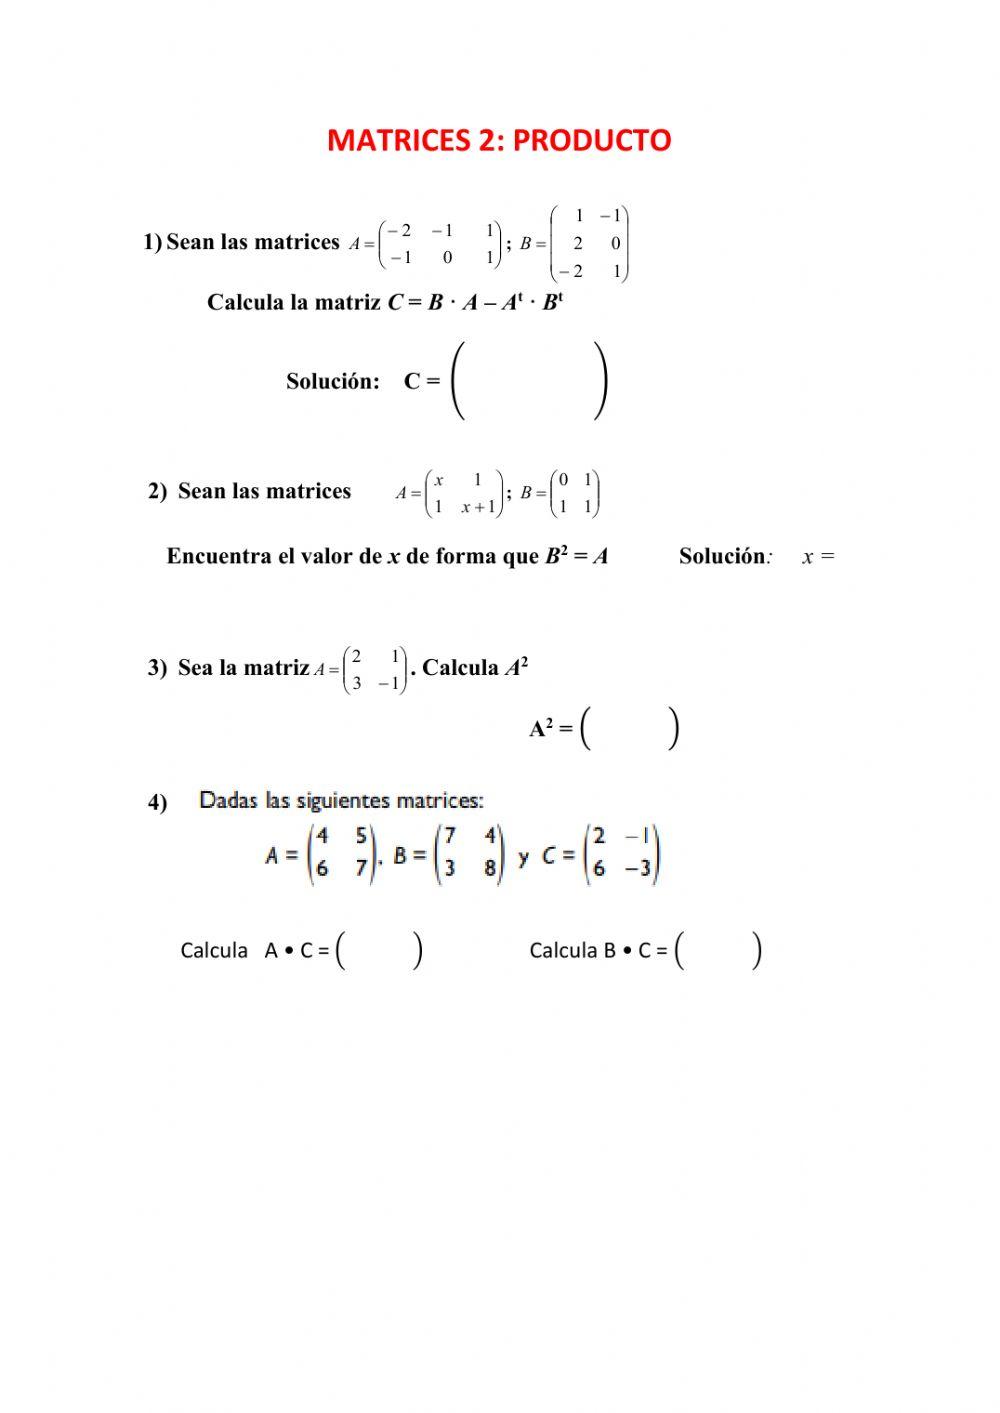 Matrices 2: Producto